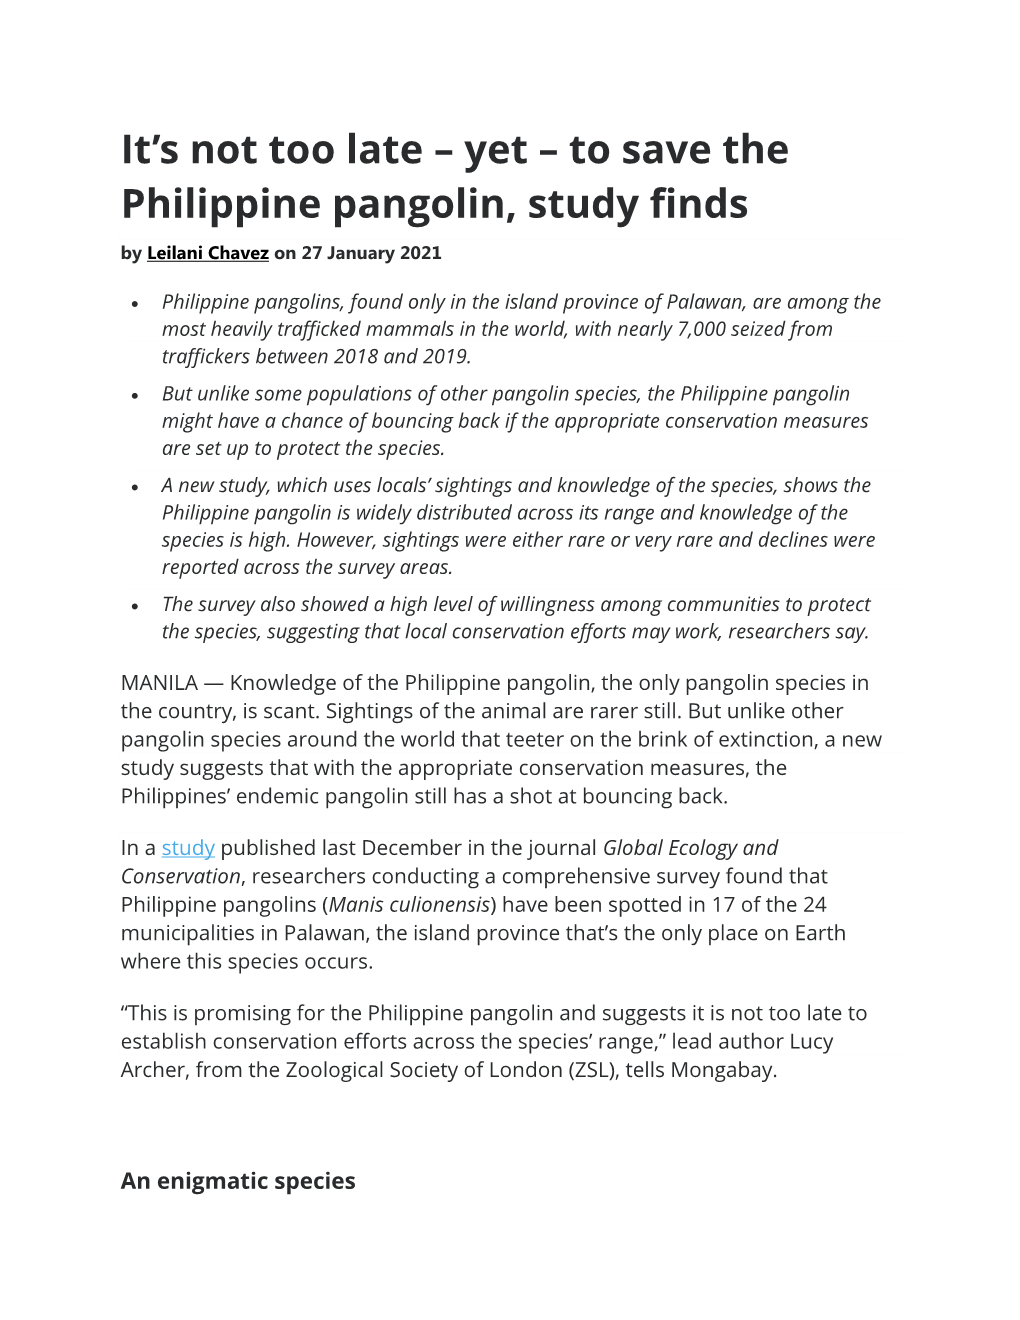 To Save the Philippine Pangolin, Study Finds by Leilani Chavez on 27 January 2021